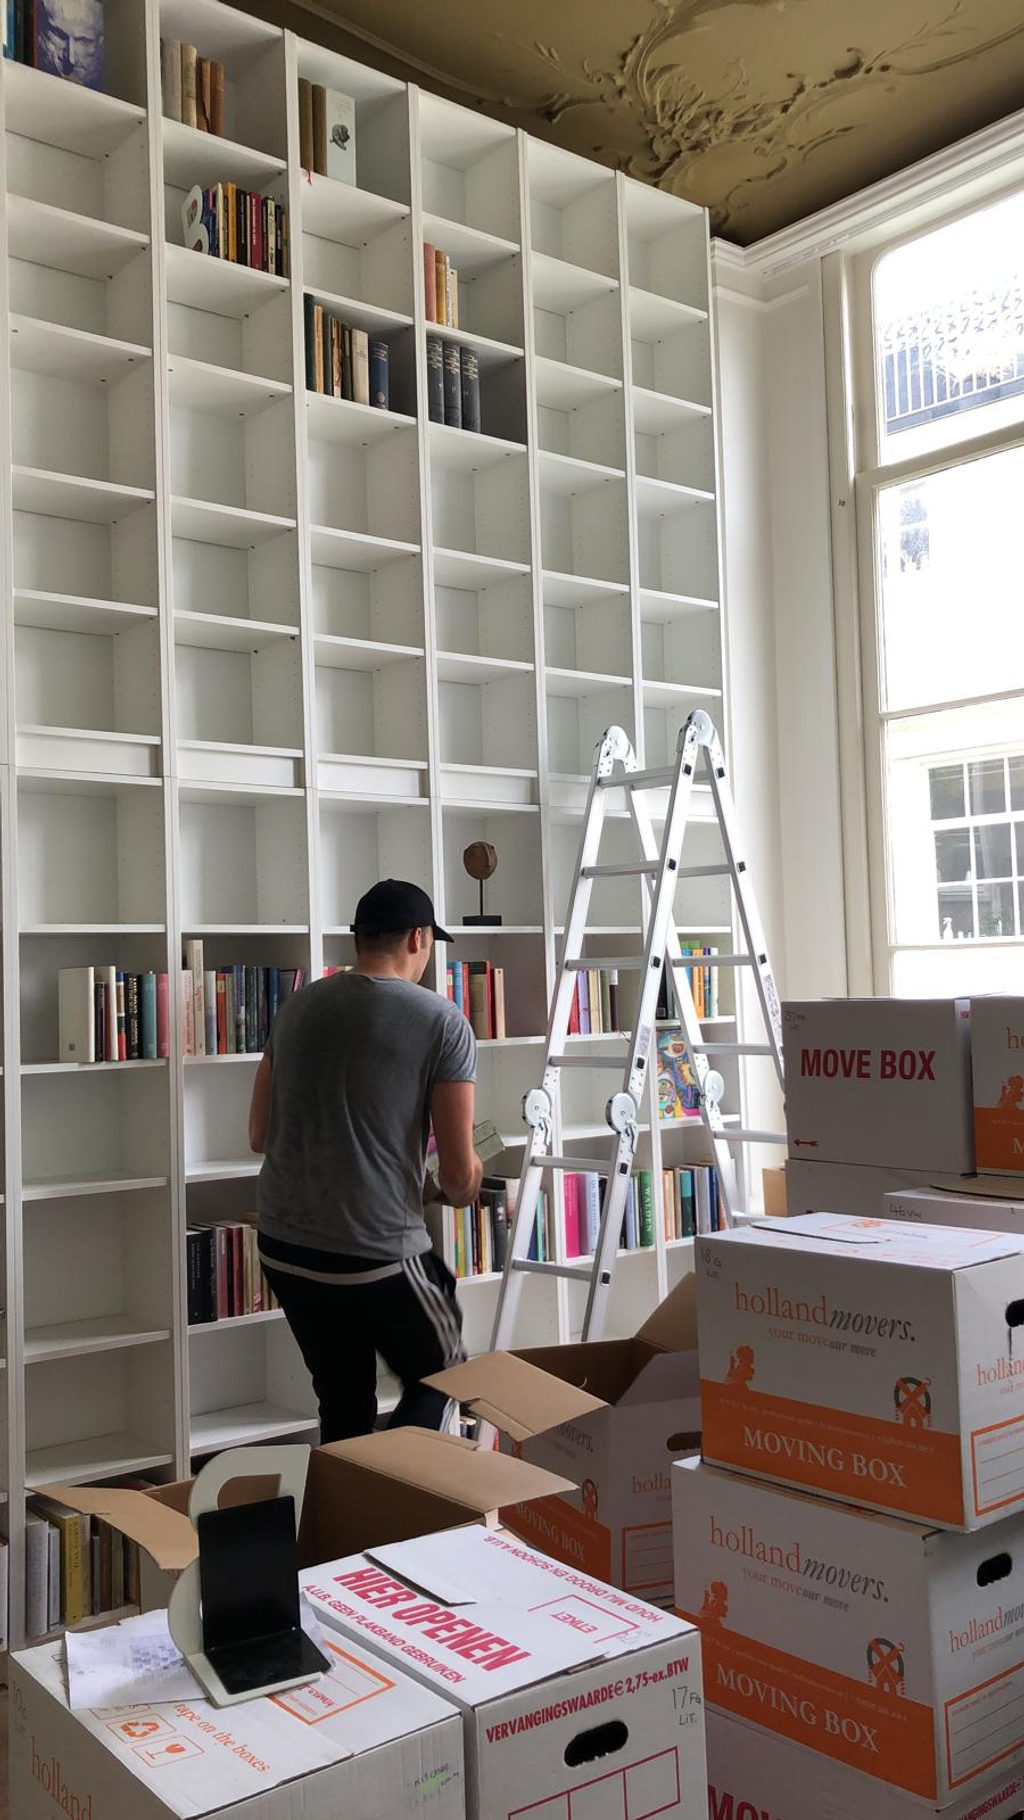 Aldorr Professional Folding Ladder with Platform. The ladder is shown in a room to be renovated. Affordable rental with BIYU.